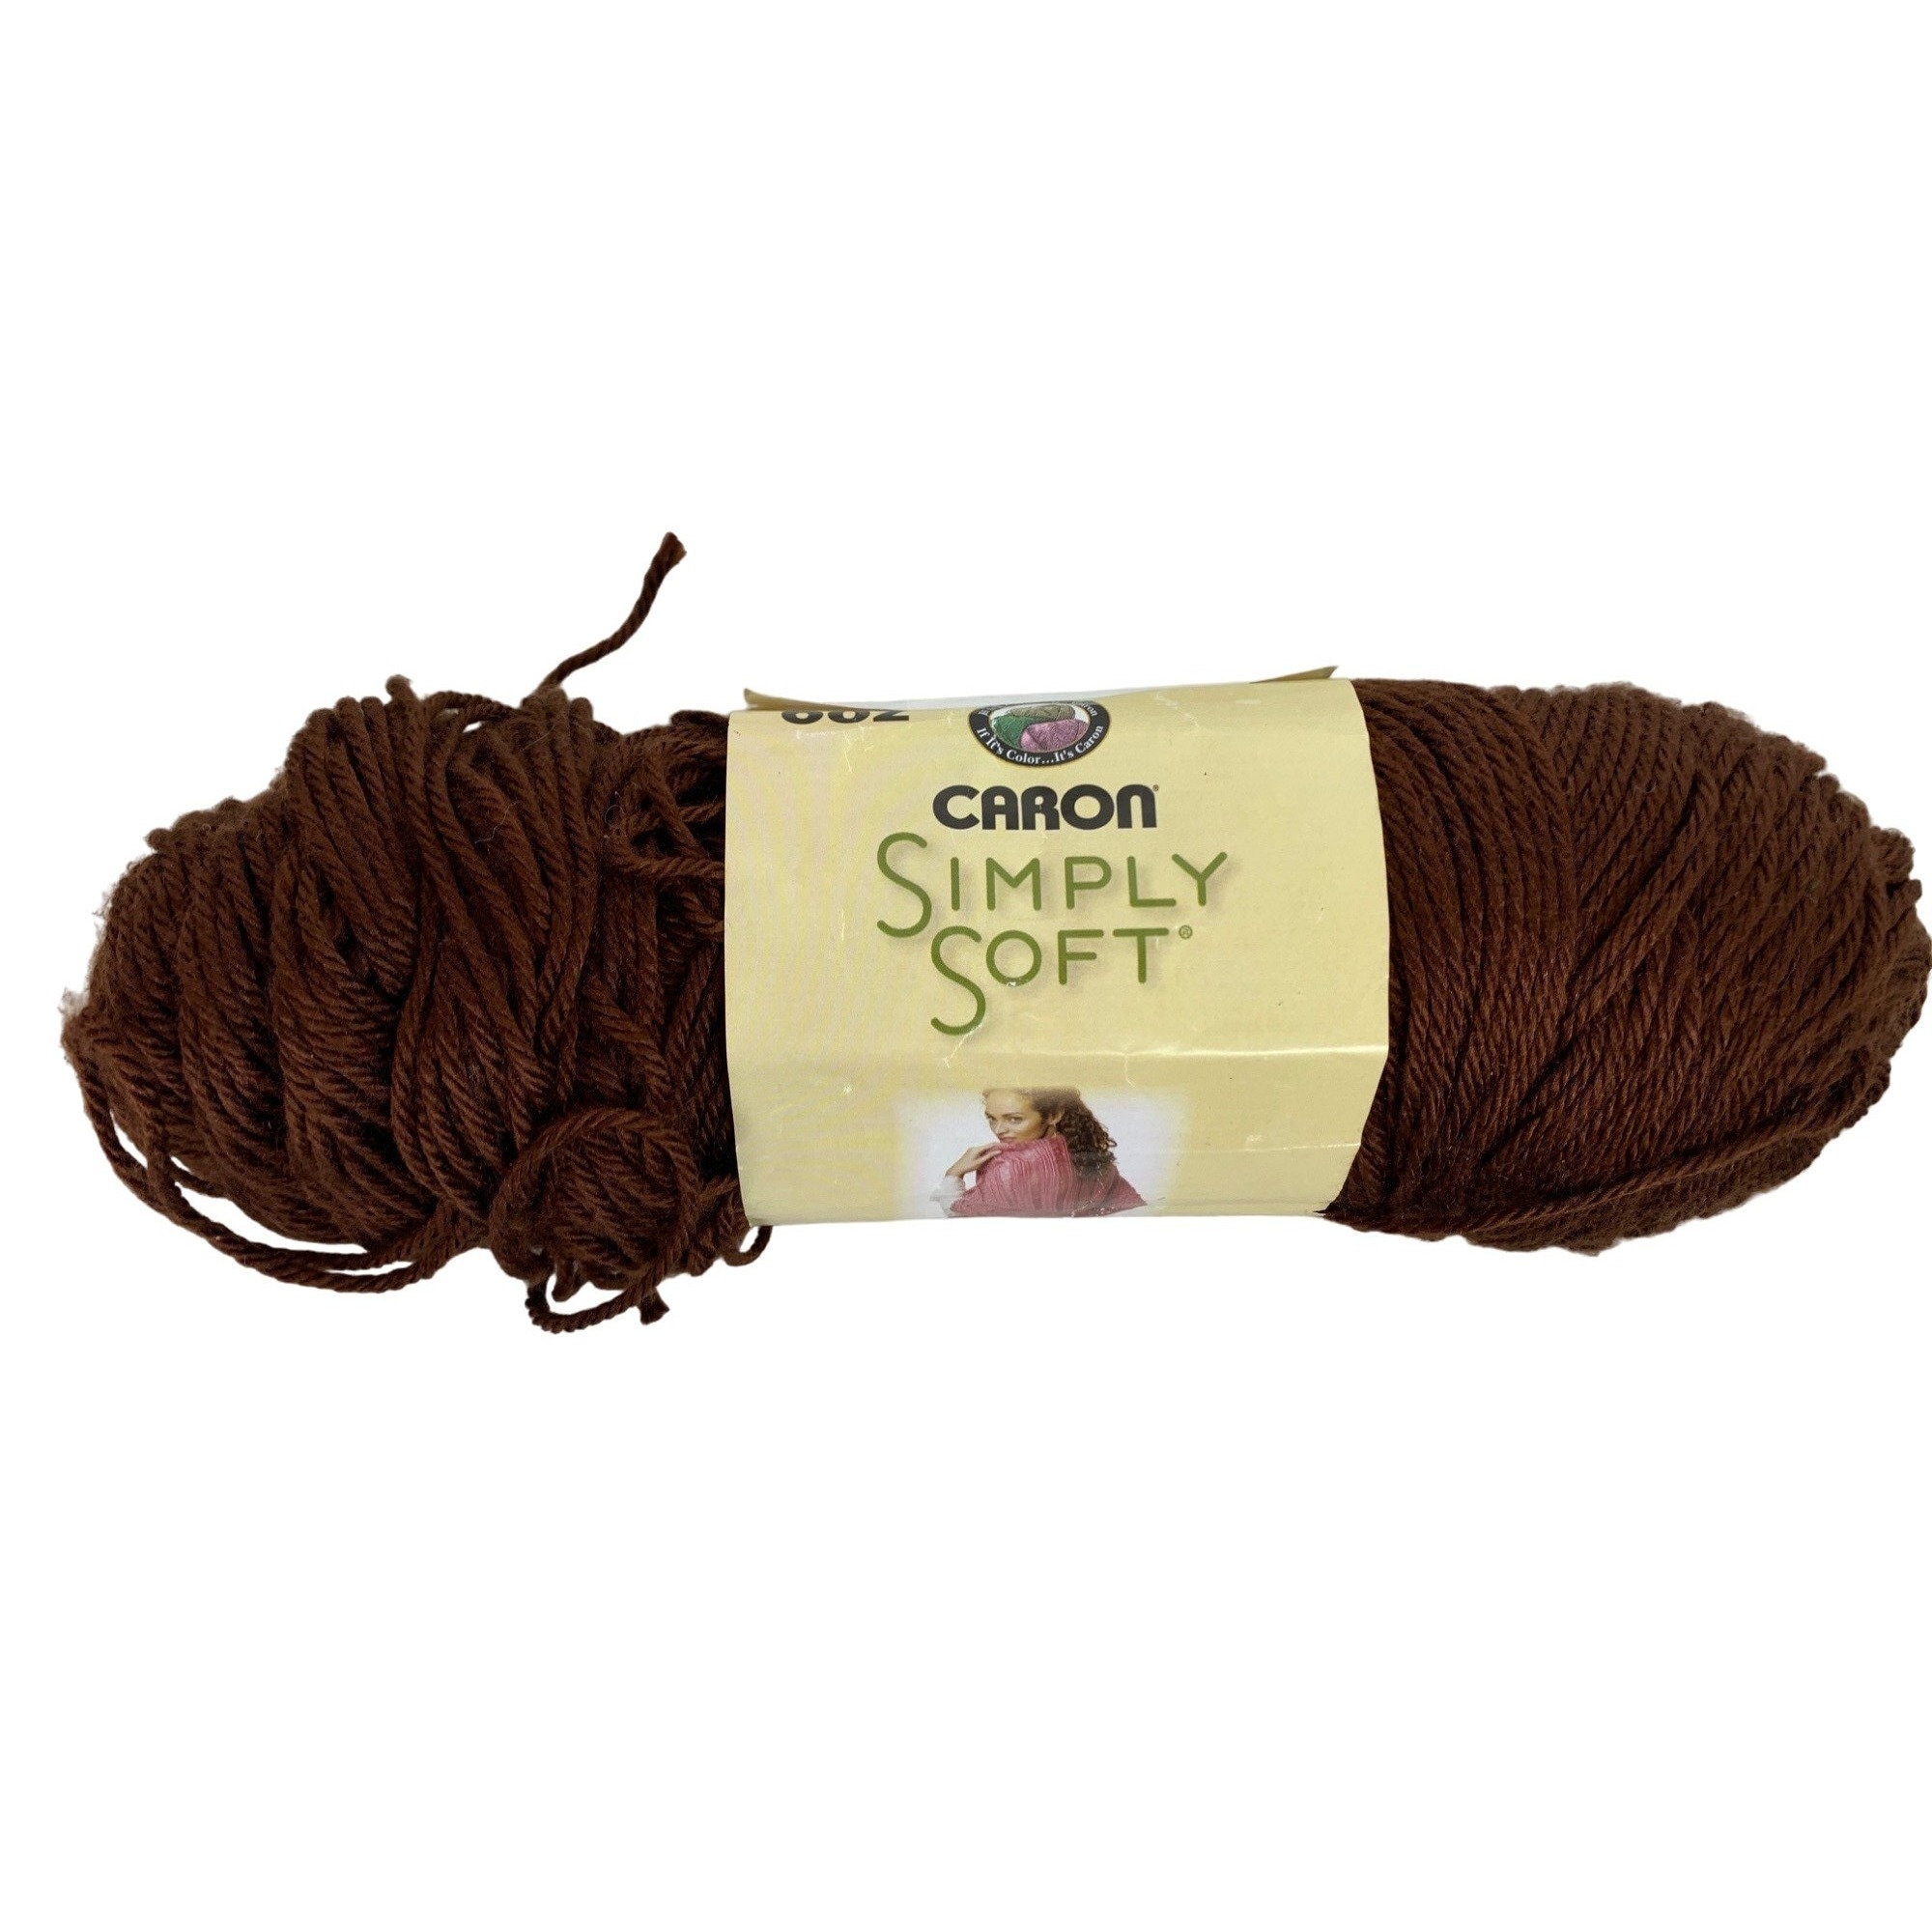 Times Square 3-pack Caron Simply Soft Stripes 100% Acrylic Yarn 5 Oz.  Skeins 19006 Knit Crochet 